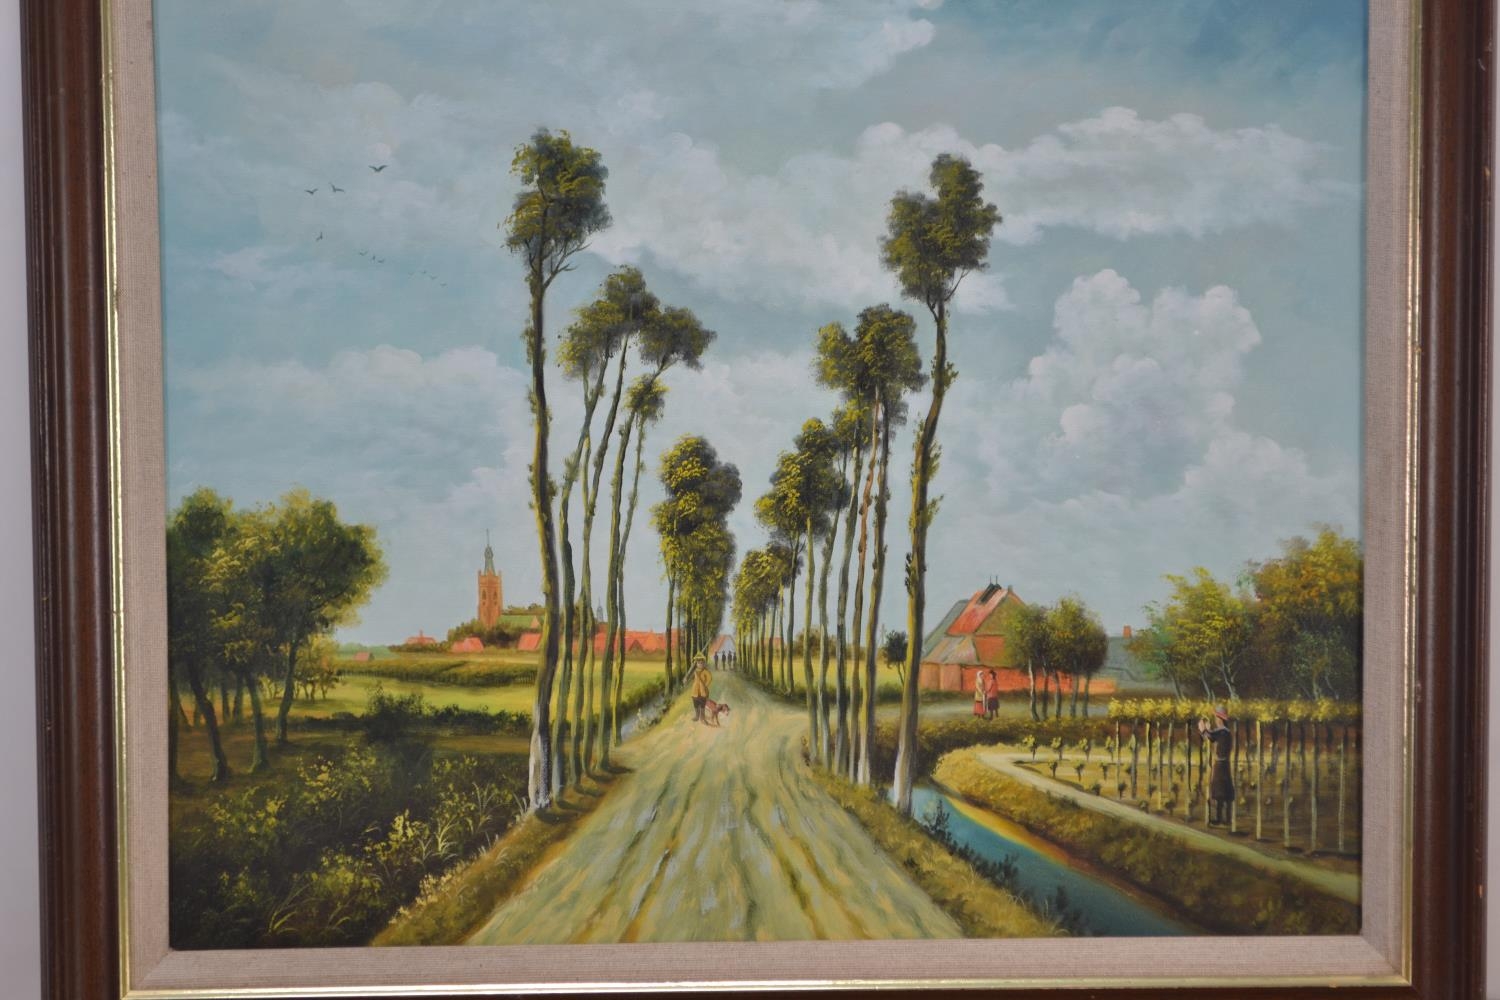 Oil on canvas. After Meindert Hobbema, 'The Avenue At Middelharnis'
72xm x 61cm inclusive of frame 